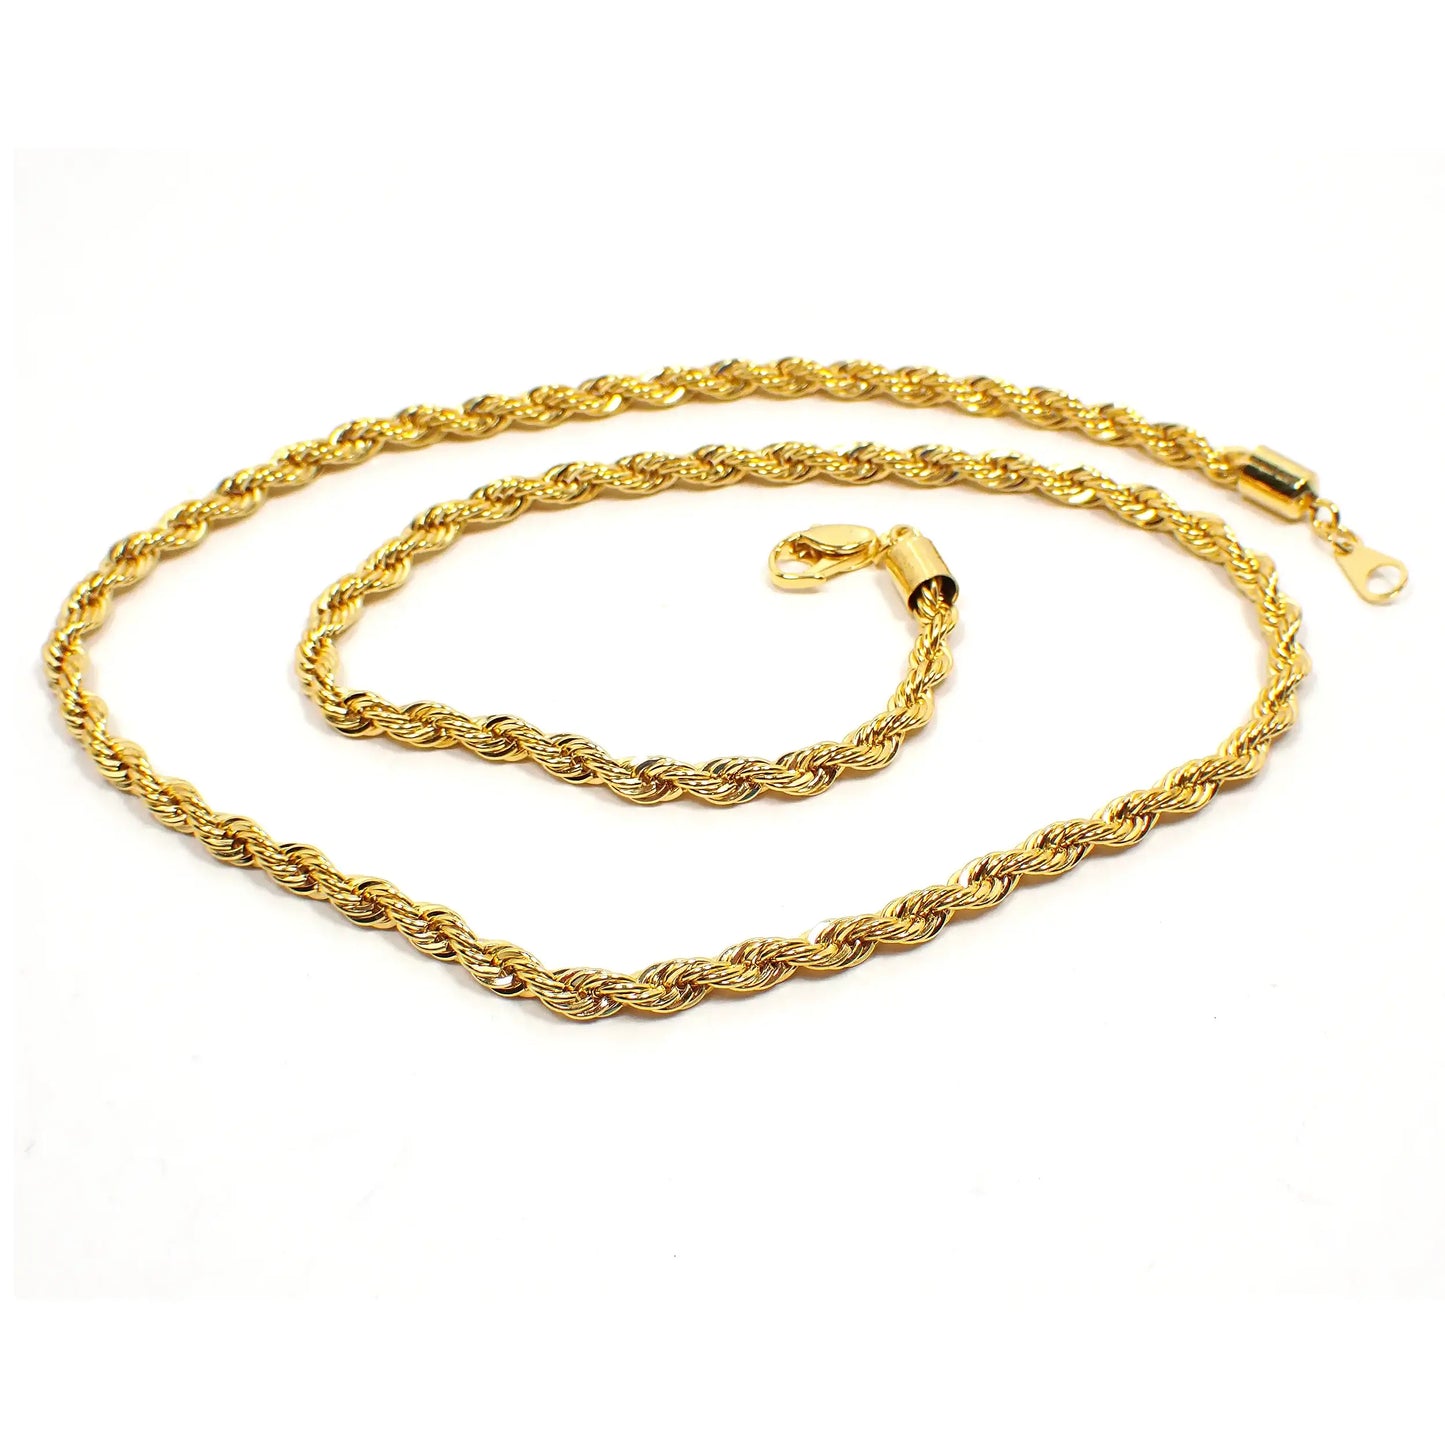 18 Inch Pre Owned Gold Tone Plated Twisted Rope Chain Necklace, Unisex Jewelry